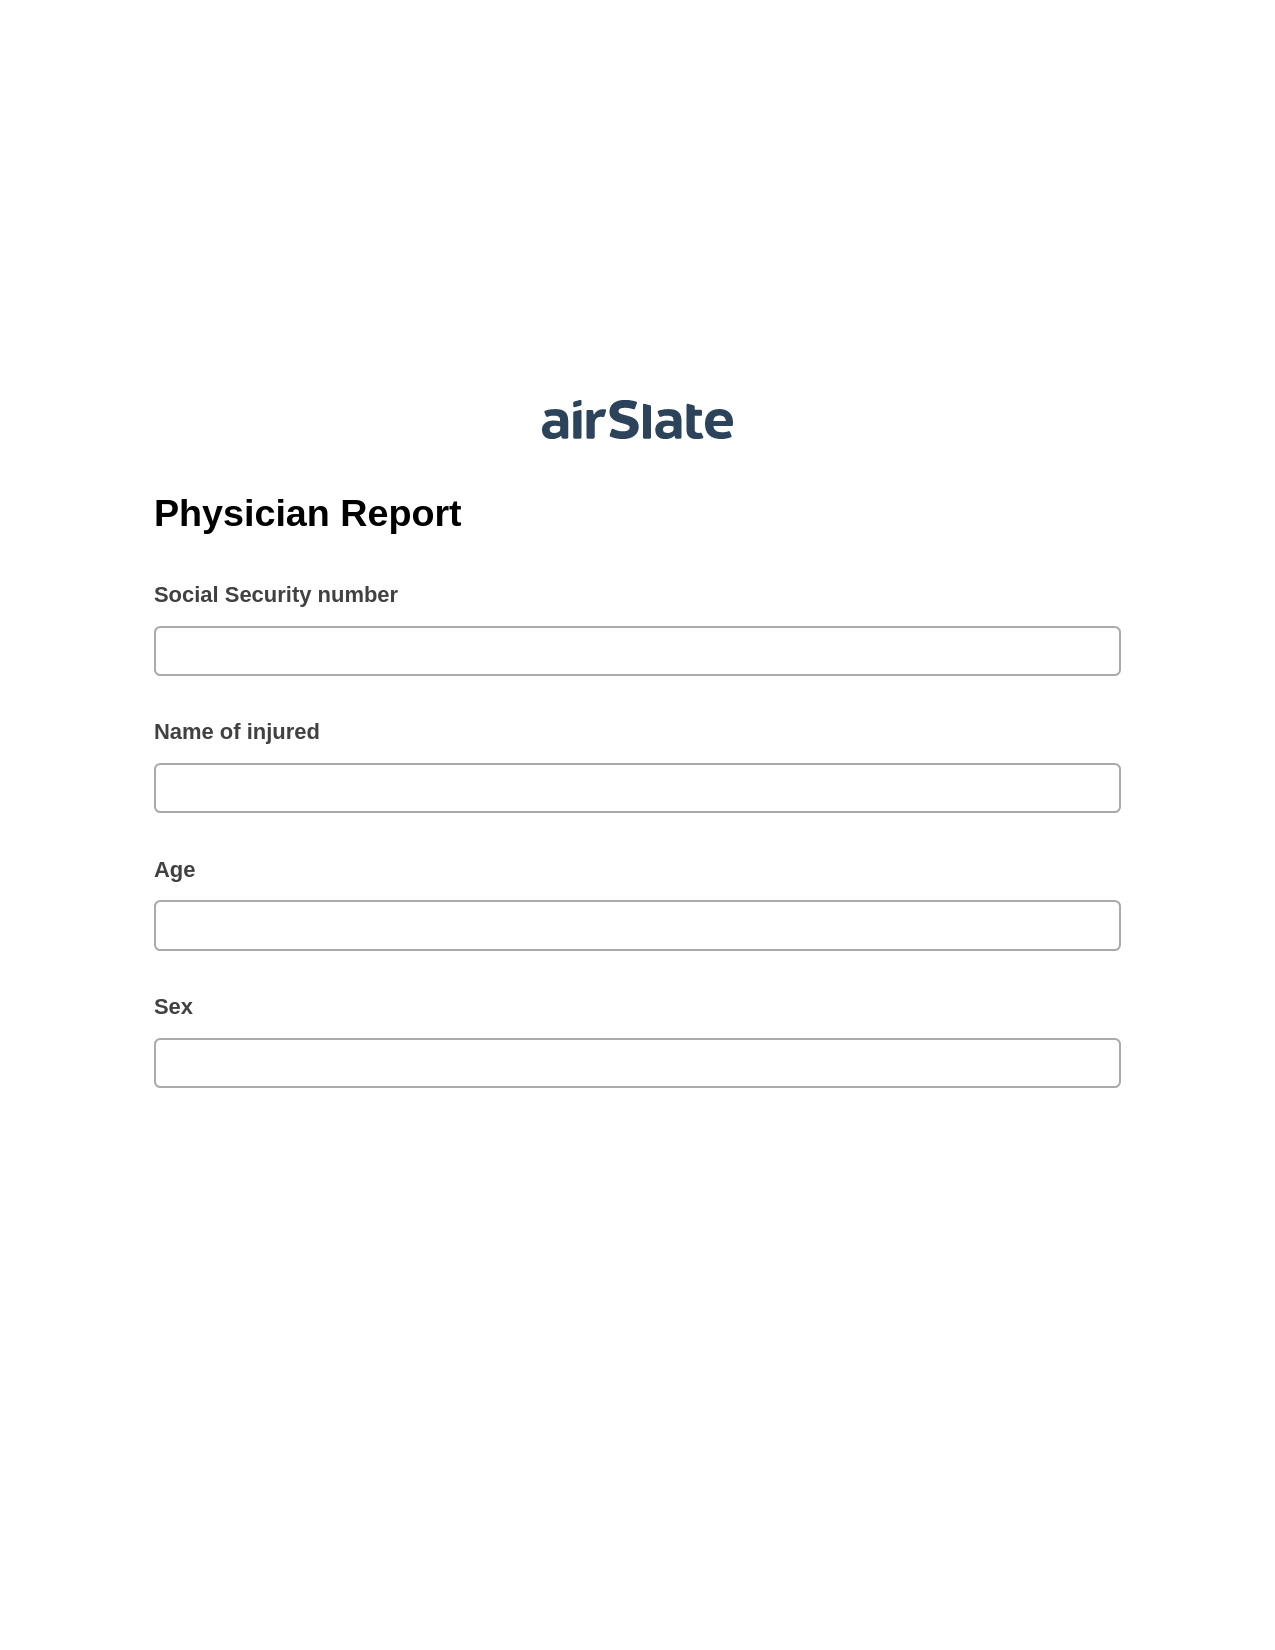 Multirole Physician Report Prefill from NetSuite records, Update MS Dynamics 365 Record Bot, Archive to OneDrive Bot